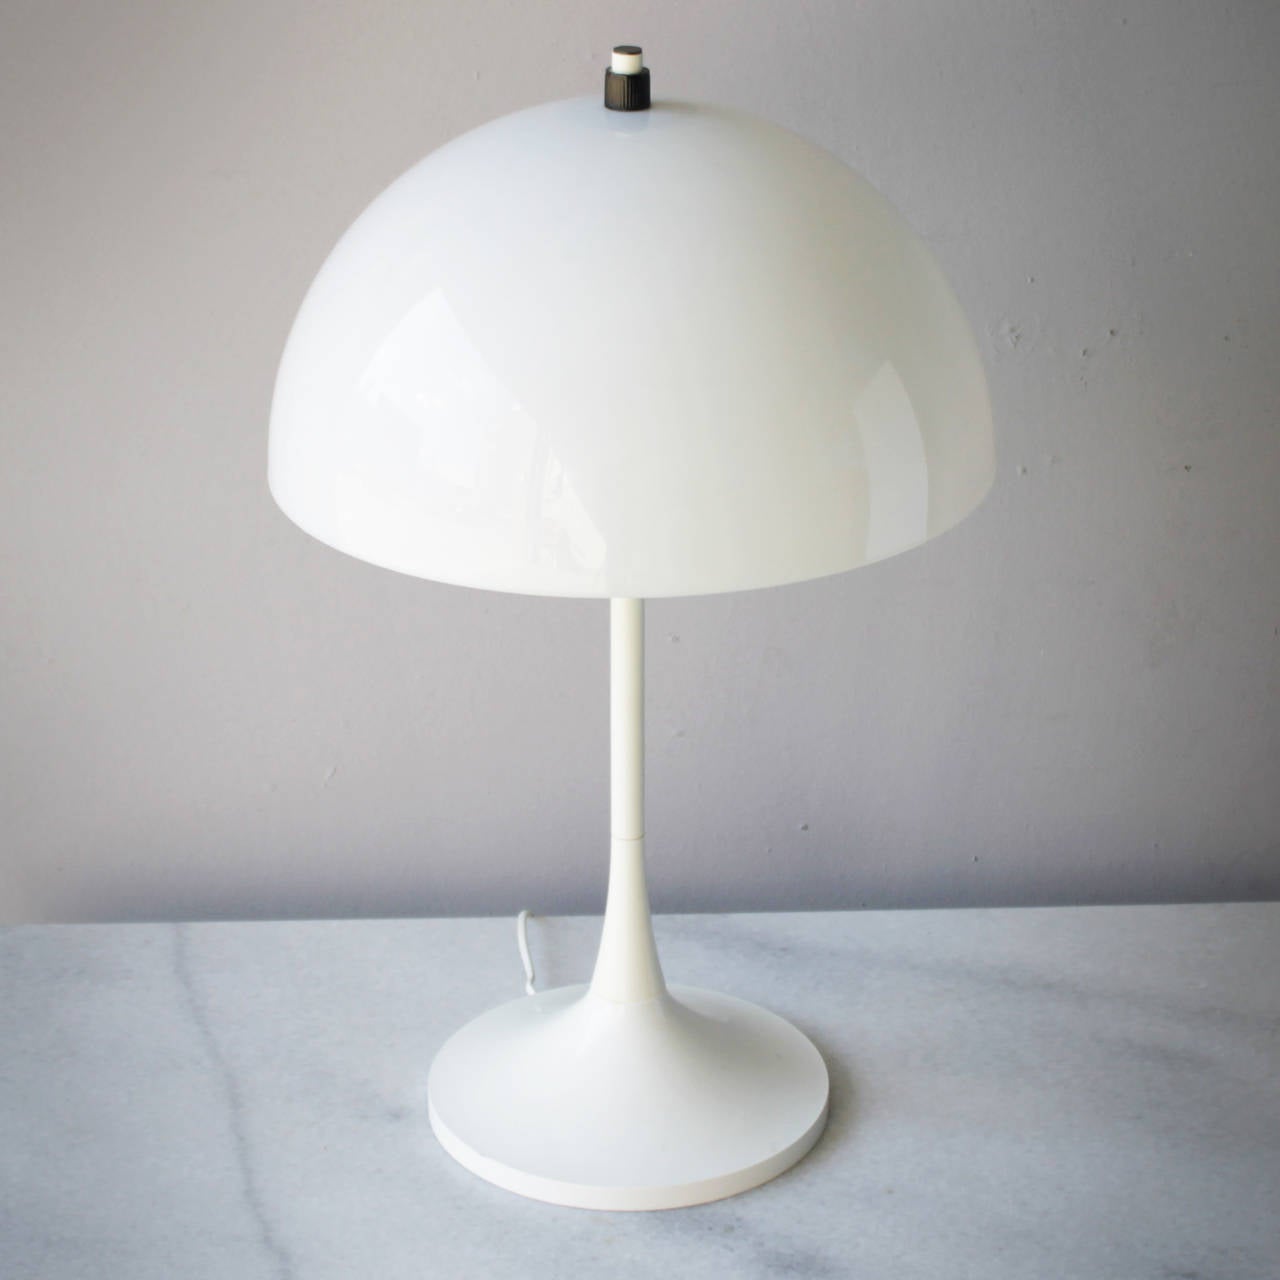 A set of two table lamps by the Dutch manufacturer Hala Zeist. They are in the manner of the 'Panthella' by Verner Panton. Materials: plastic; central shaft piece of metal. Good original condition.
Dimensions height 25.6 in. (65 cm), diameter 15.7